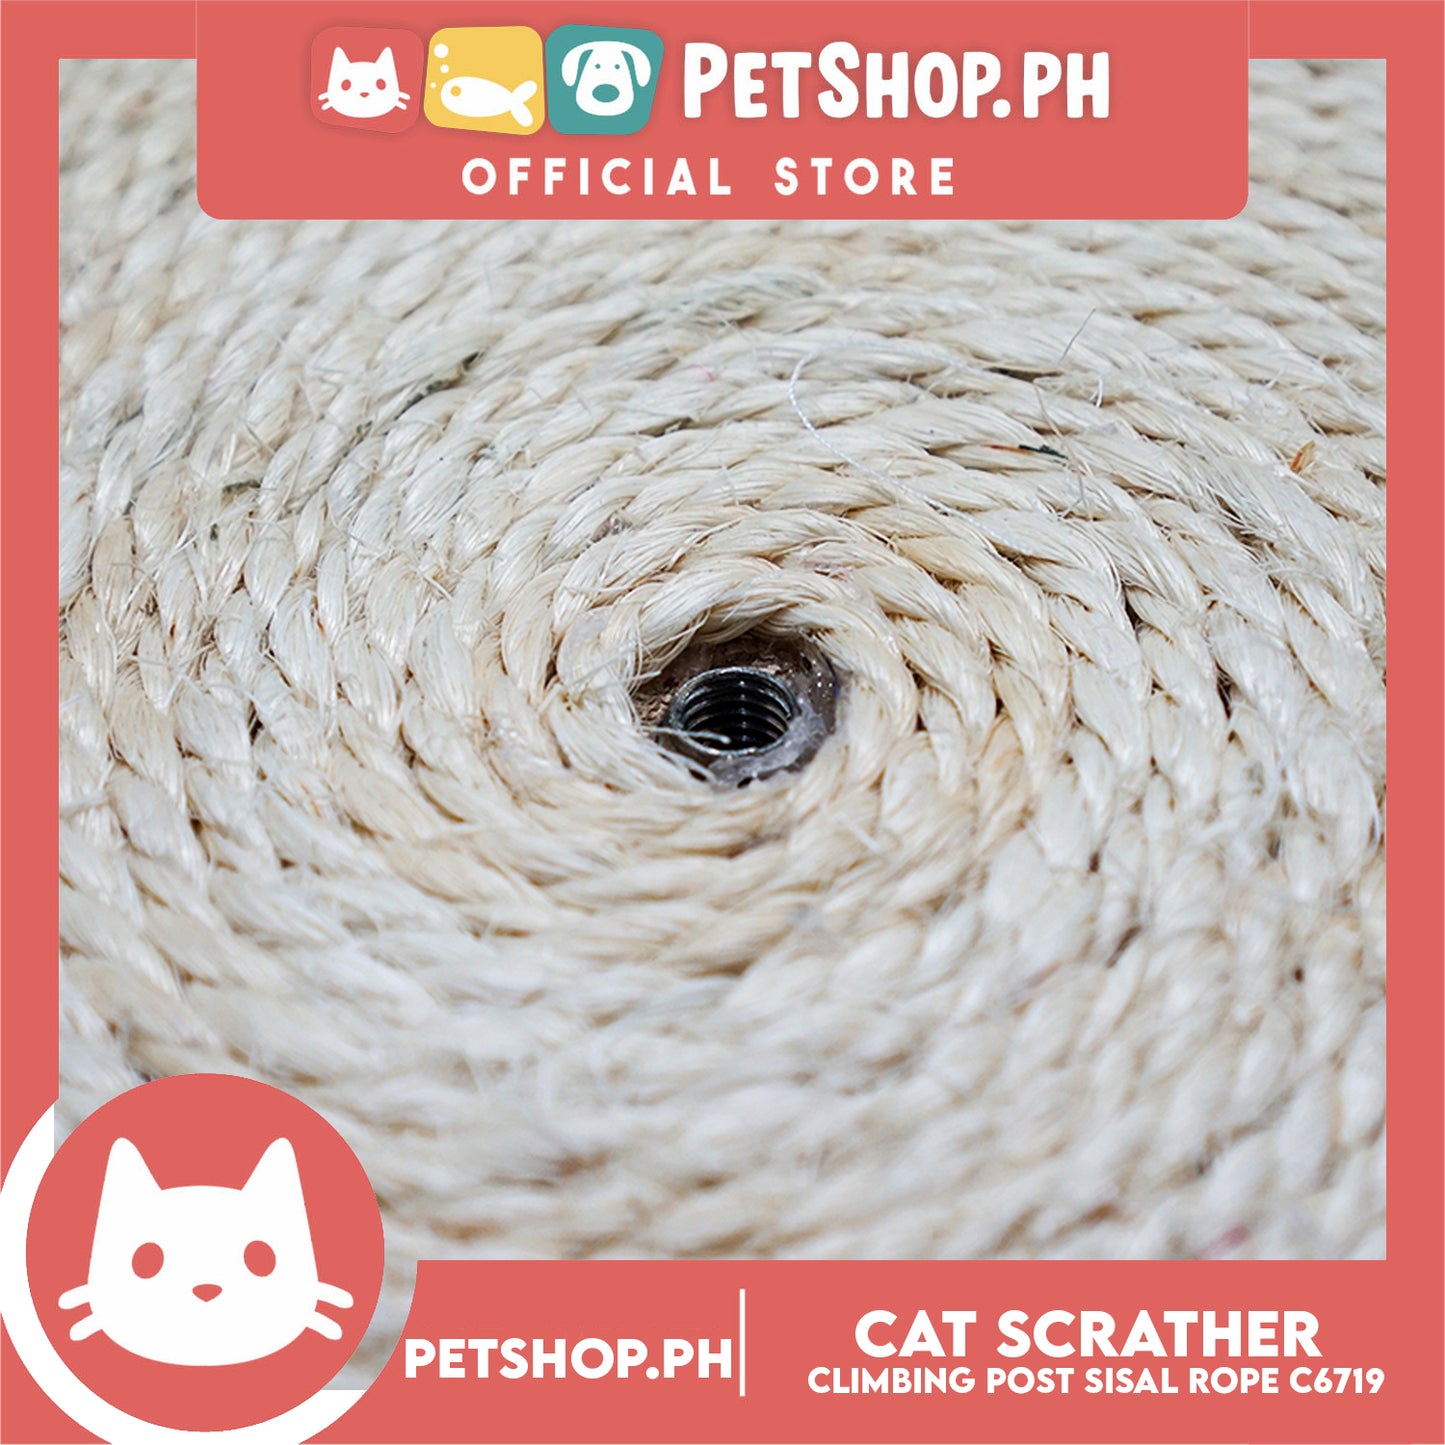 Cat Scratcher Climbing Post and Sisal Rope C6719 with Dangling Teasing Rope for Cat Grinding Claws & Protecting Furniture